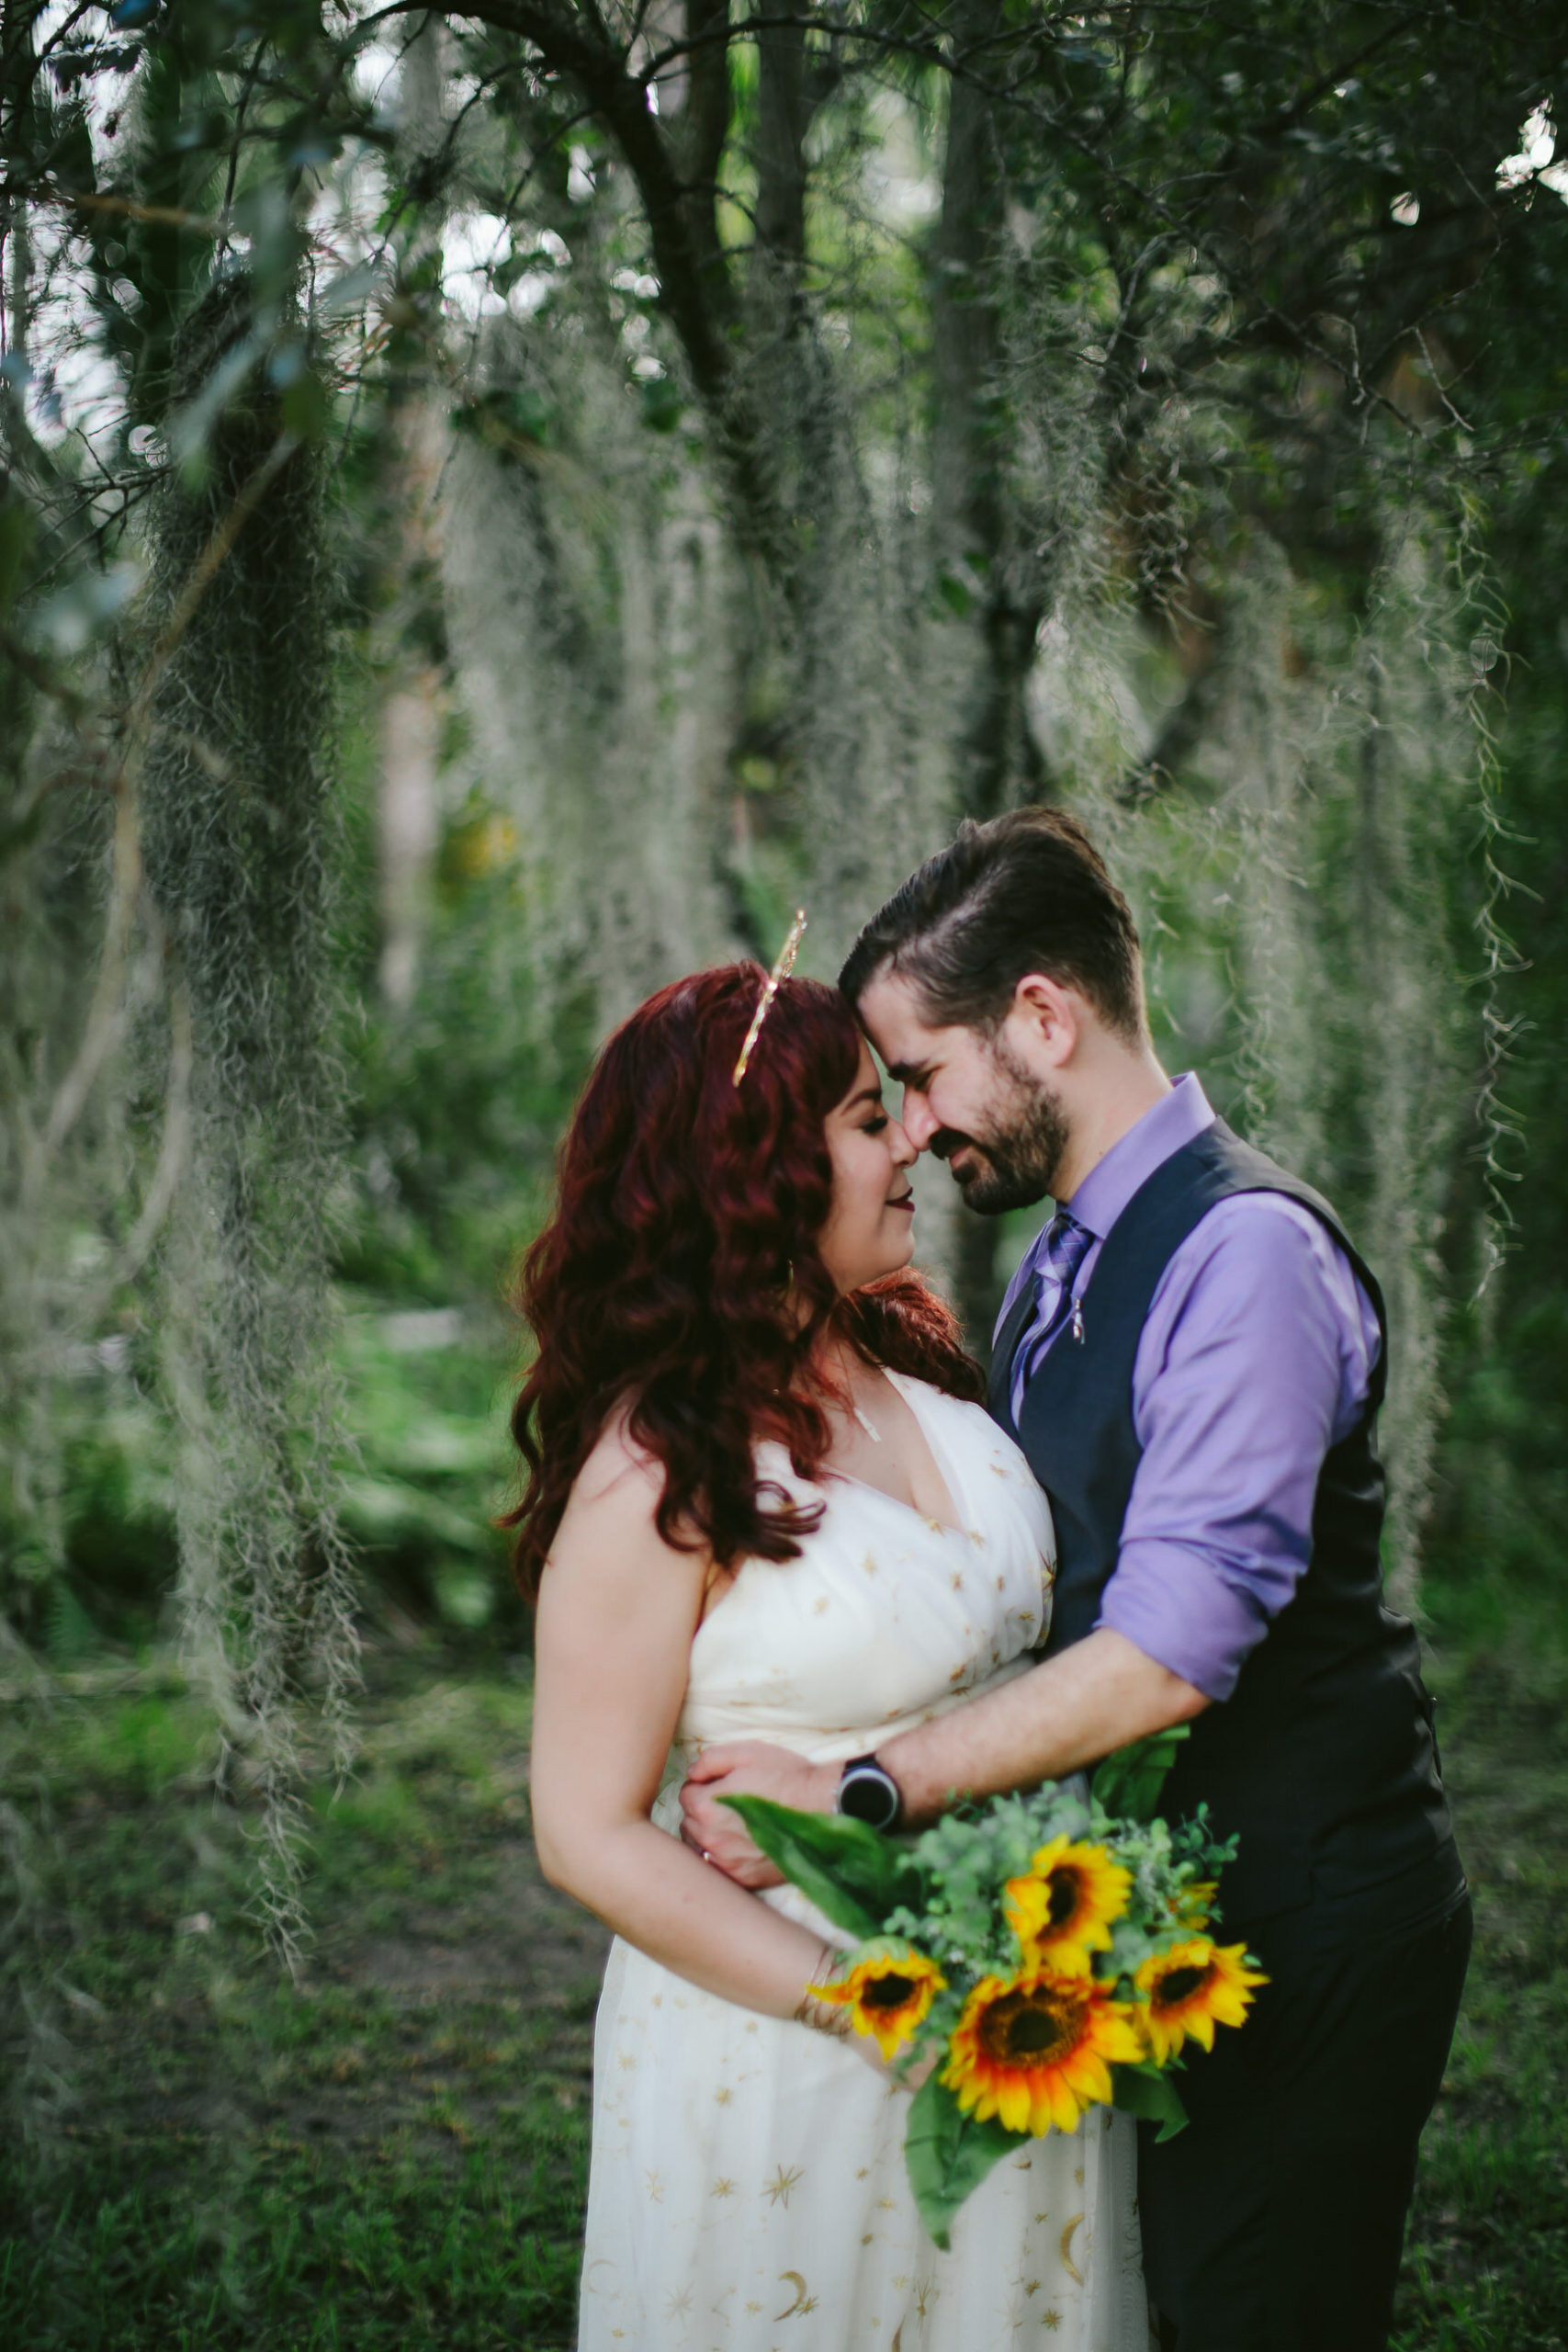 Bride-and-Groom-Cuddling-Nature-Wilton-Manors-Elopement-Day